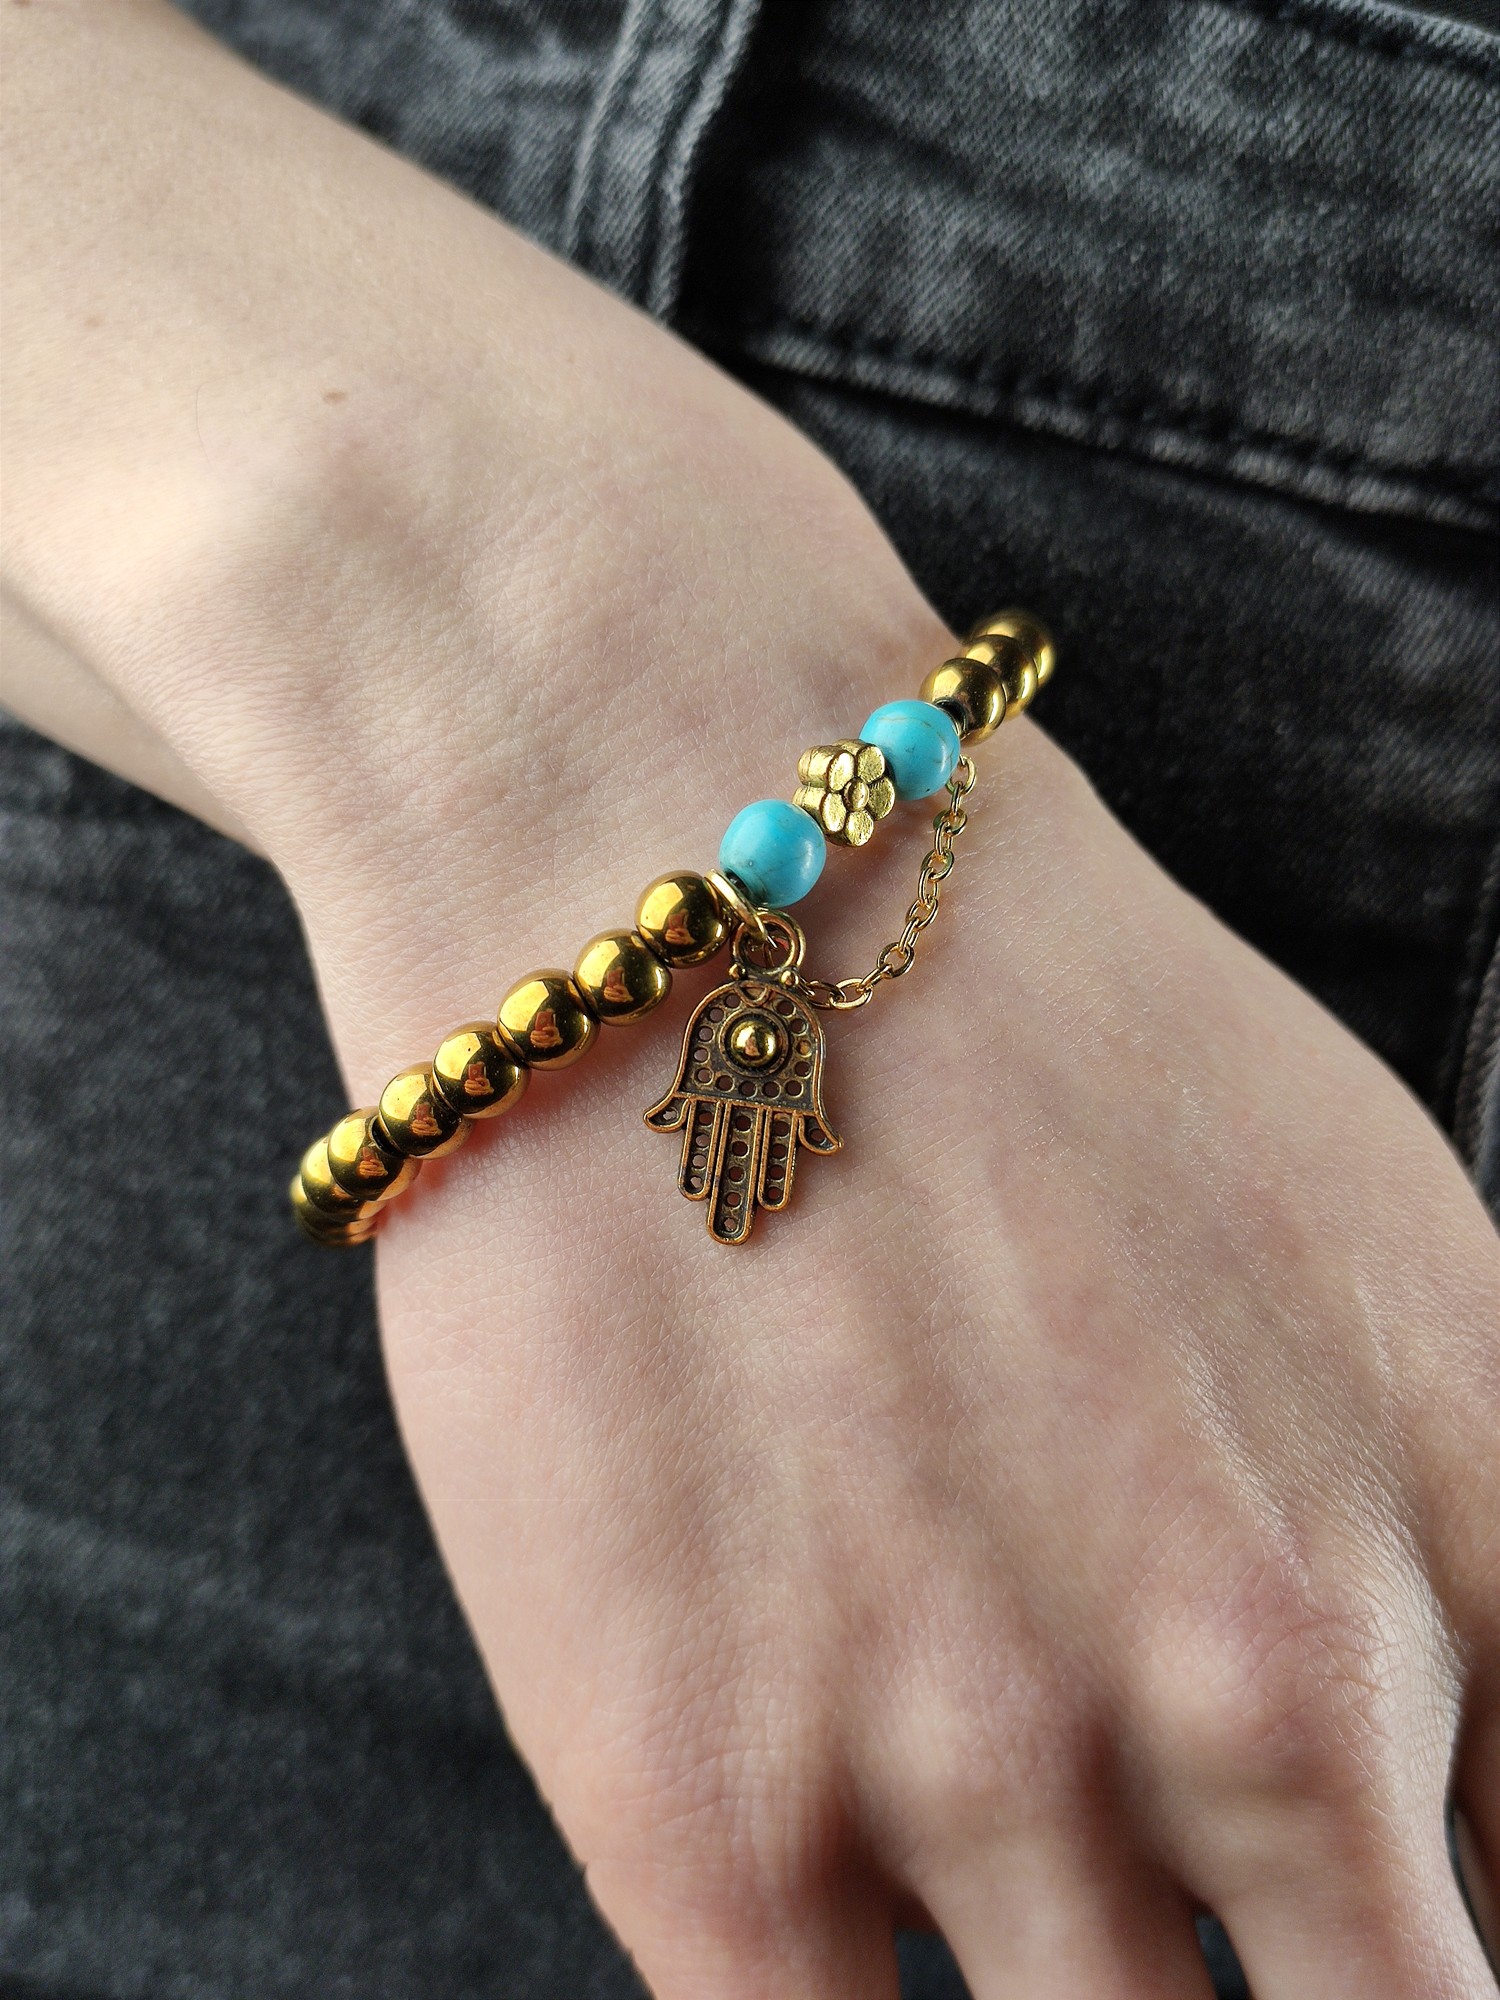 Bracelet with natural stones and pendant with antique gold